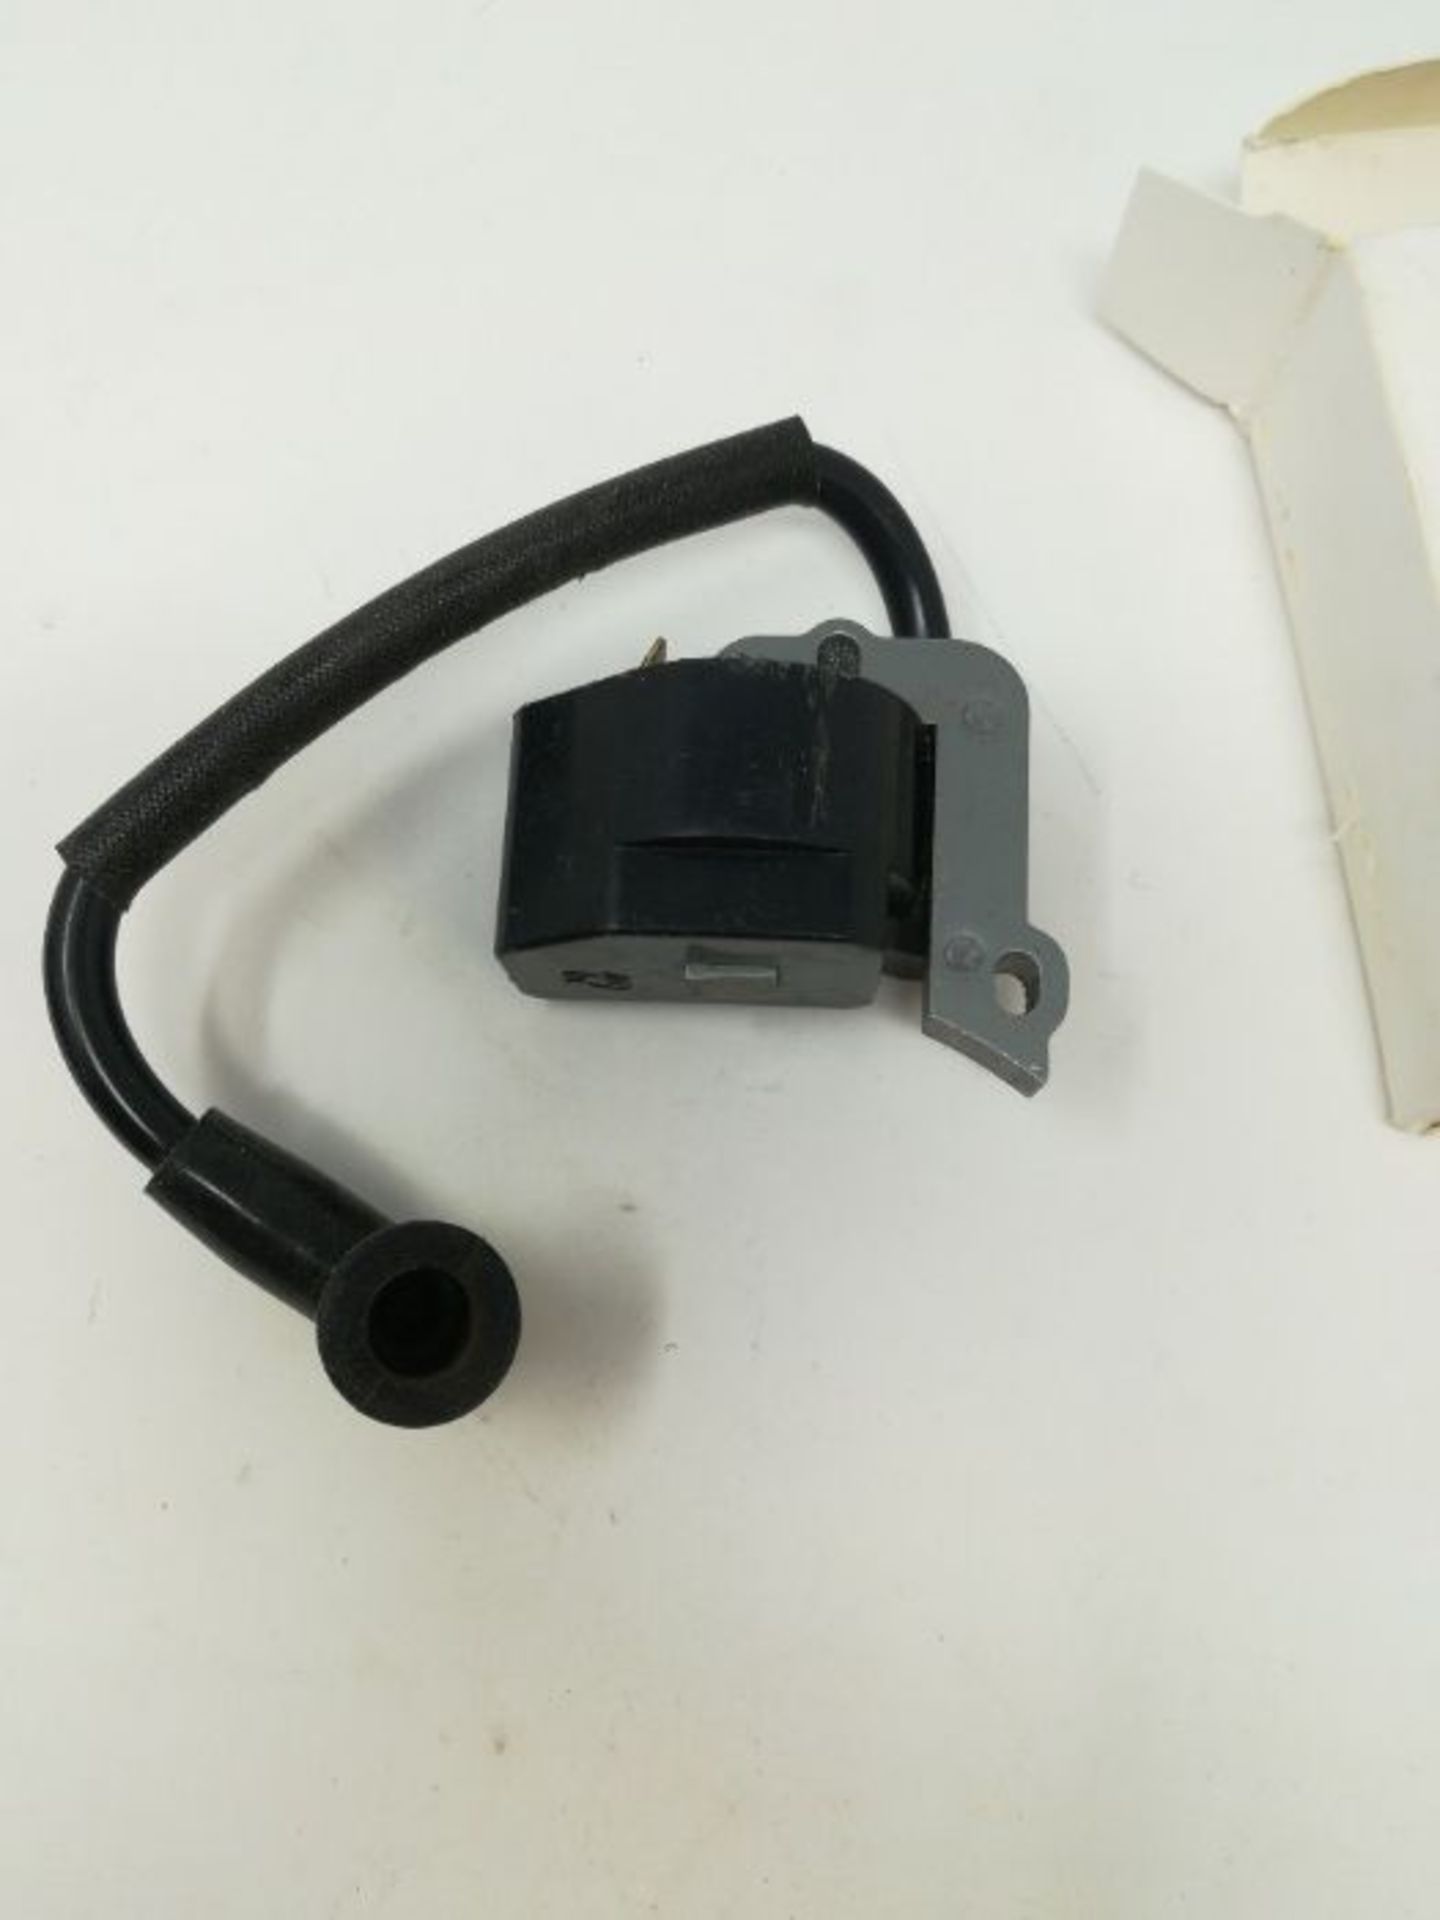 WANWU Ignition Coil For Stihl FC55 FS38 FS45 FS55 HL45 HS45 KM55 String Trimmer Replac - Image 2 of 2